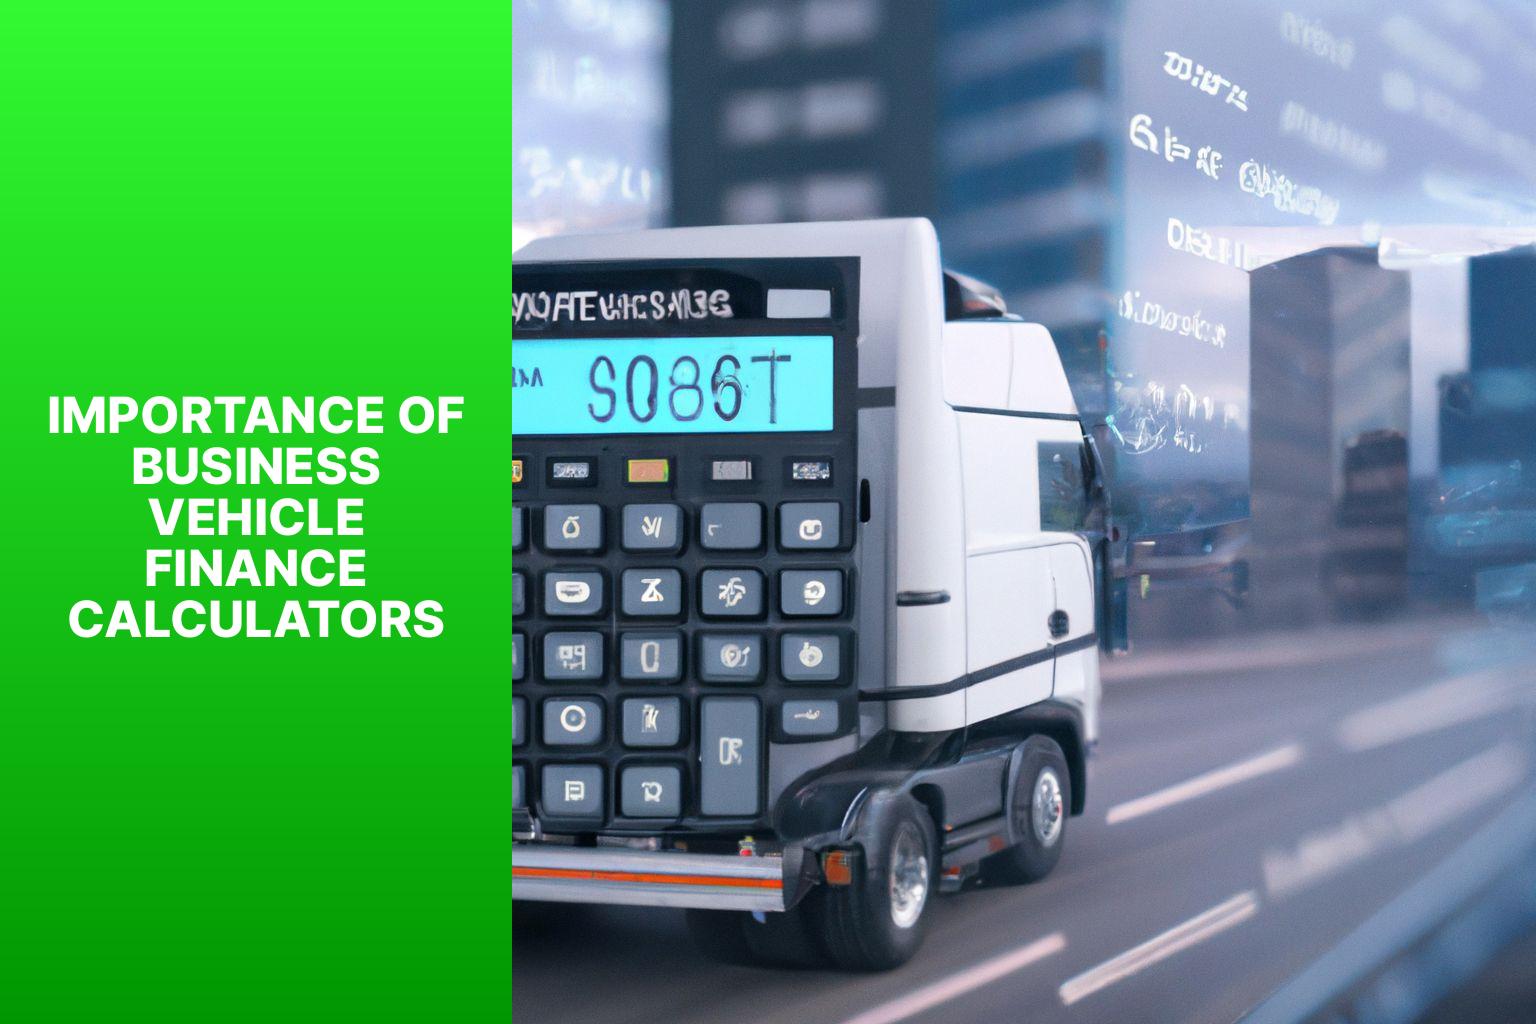 Importance of Business Vehicle Finance Calculators - Truck Finance Demystified: A Look at Business Vehicle Finance Calculators 